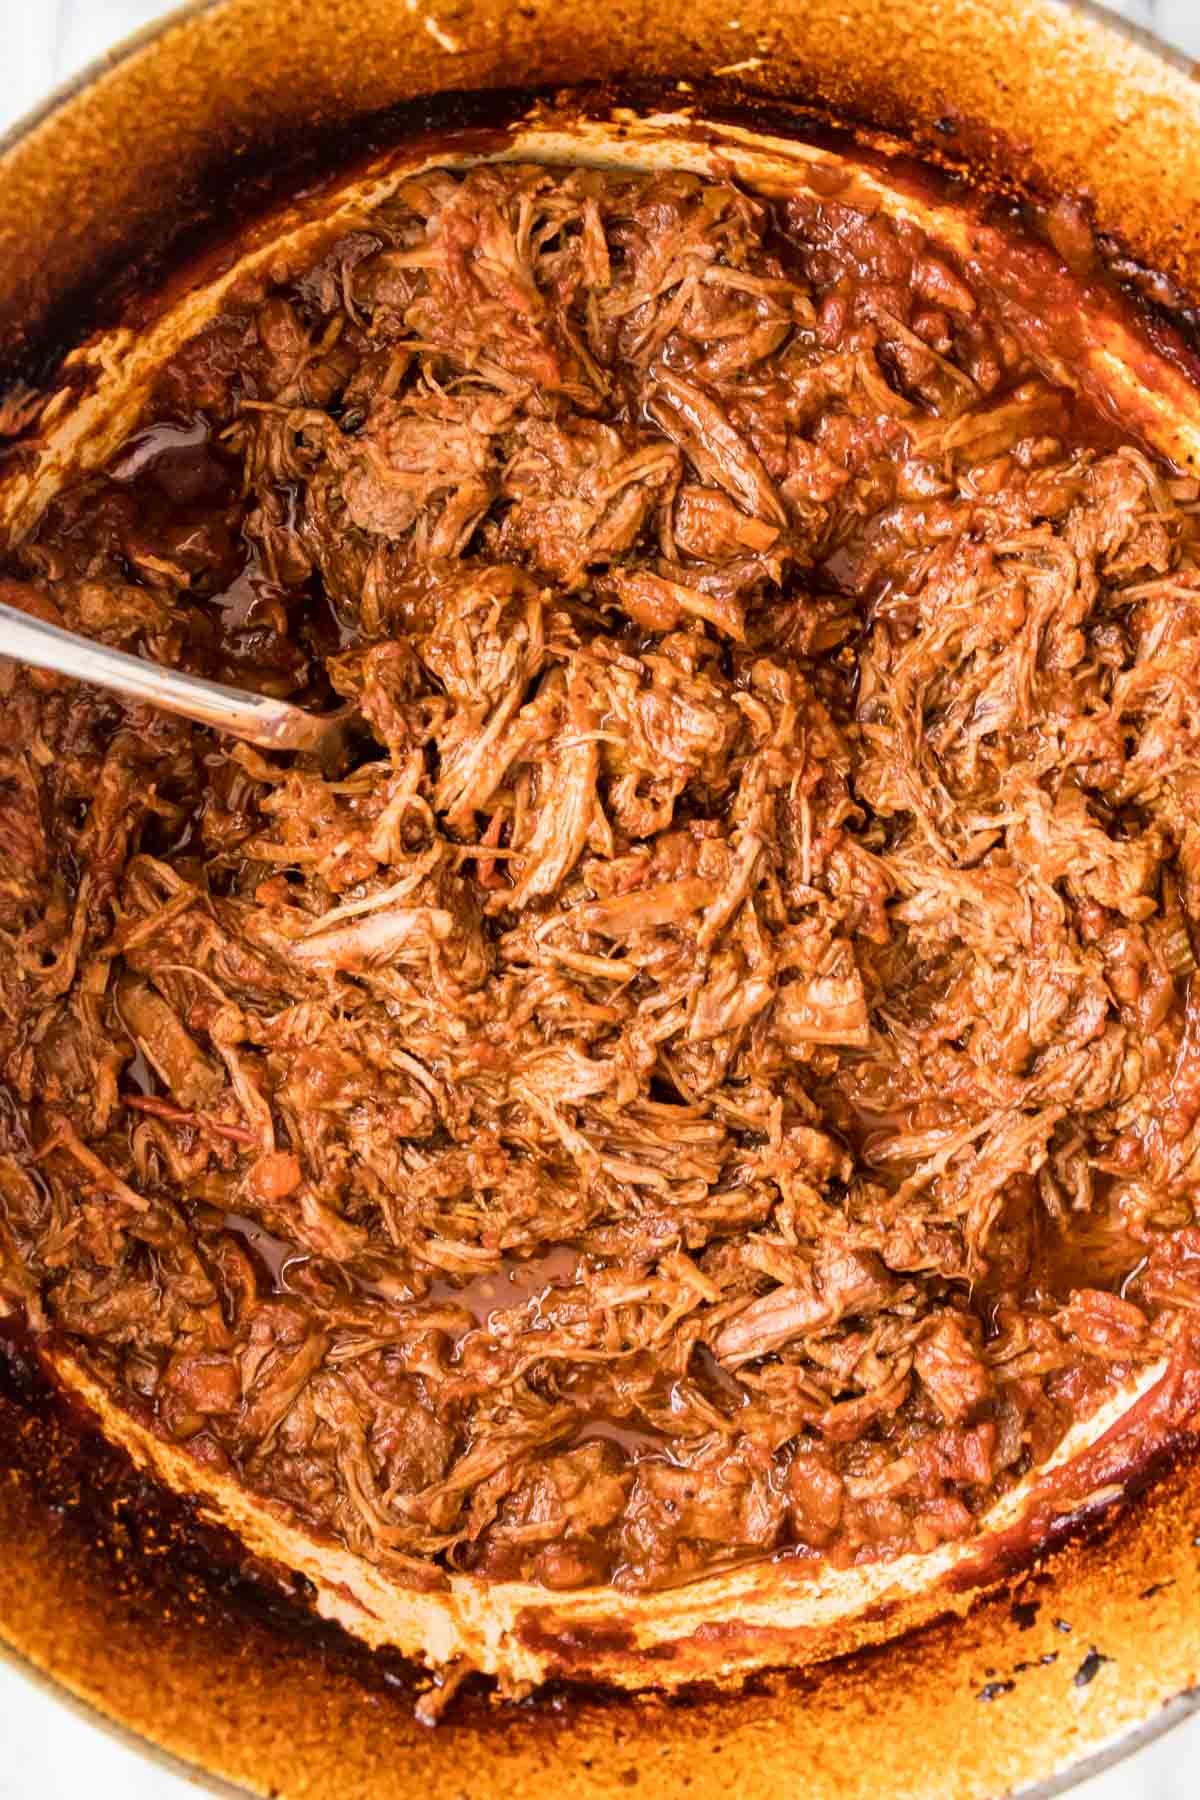 Overhead view of shredded beef in a tomato sauce.